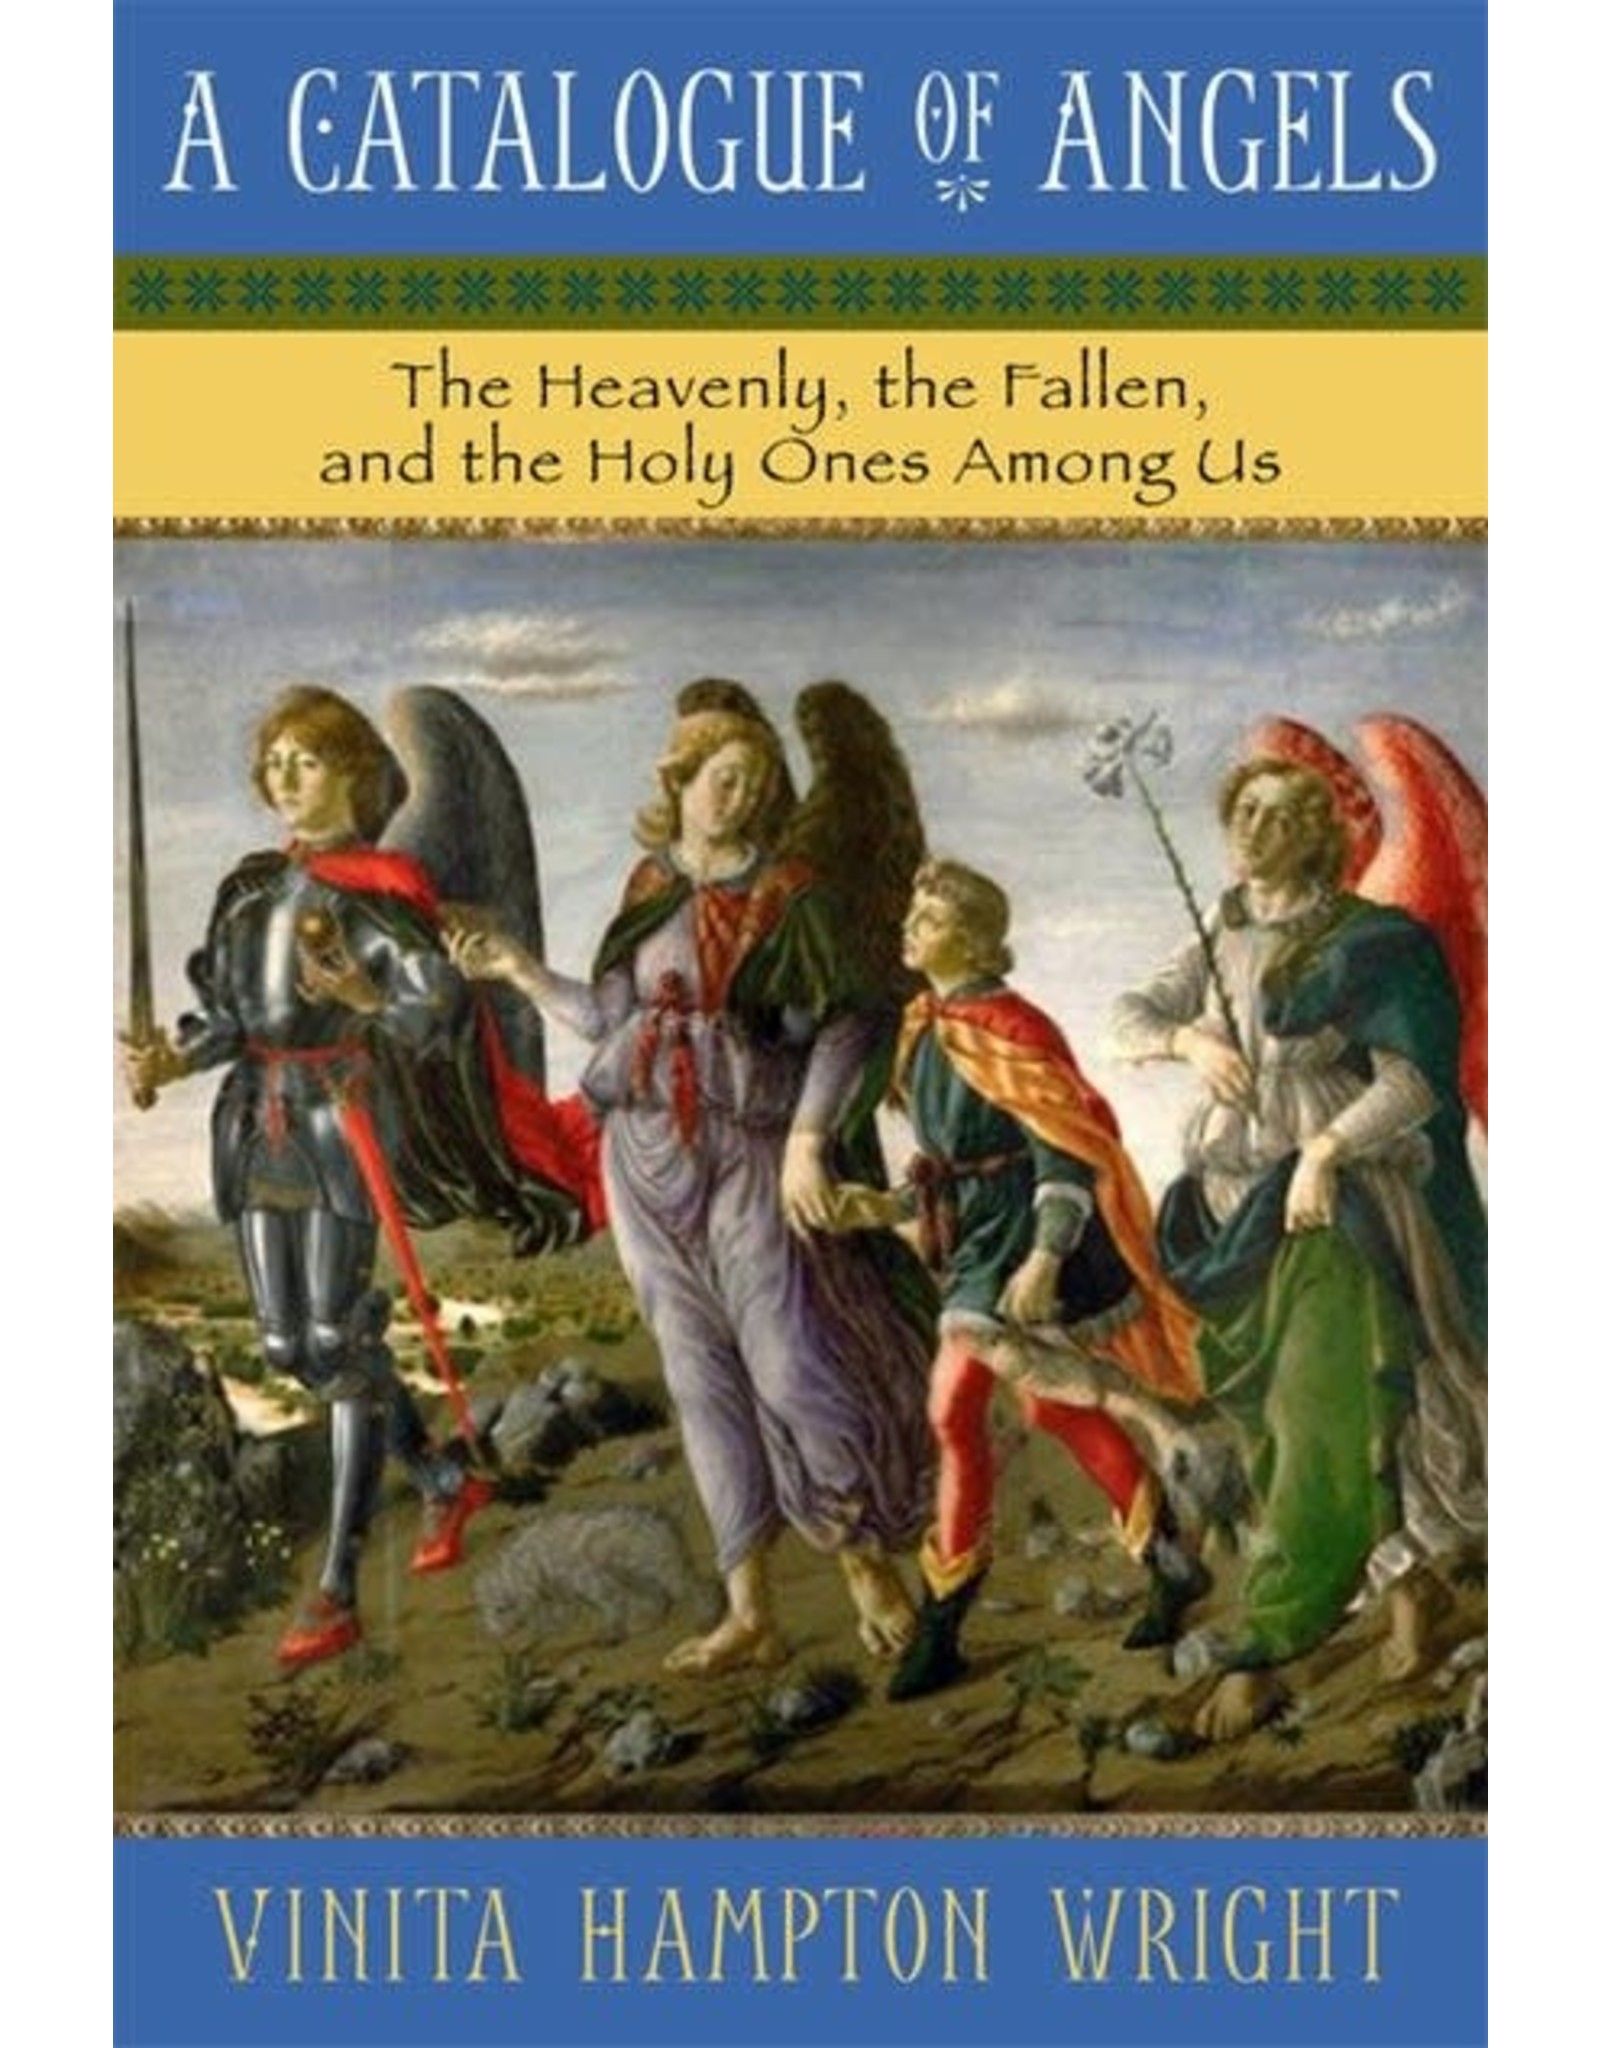 A Catalogue of Angels: The Heavenly, the Fallen, & the Holy Ones Among Us